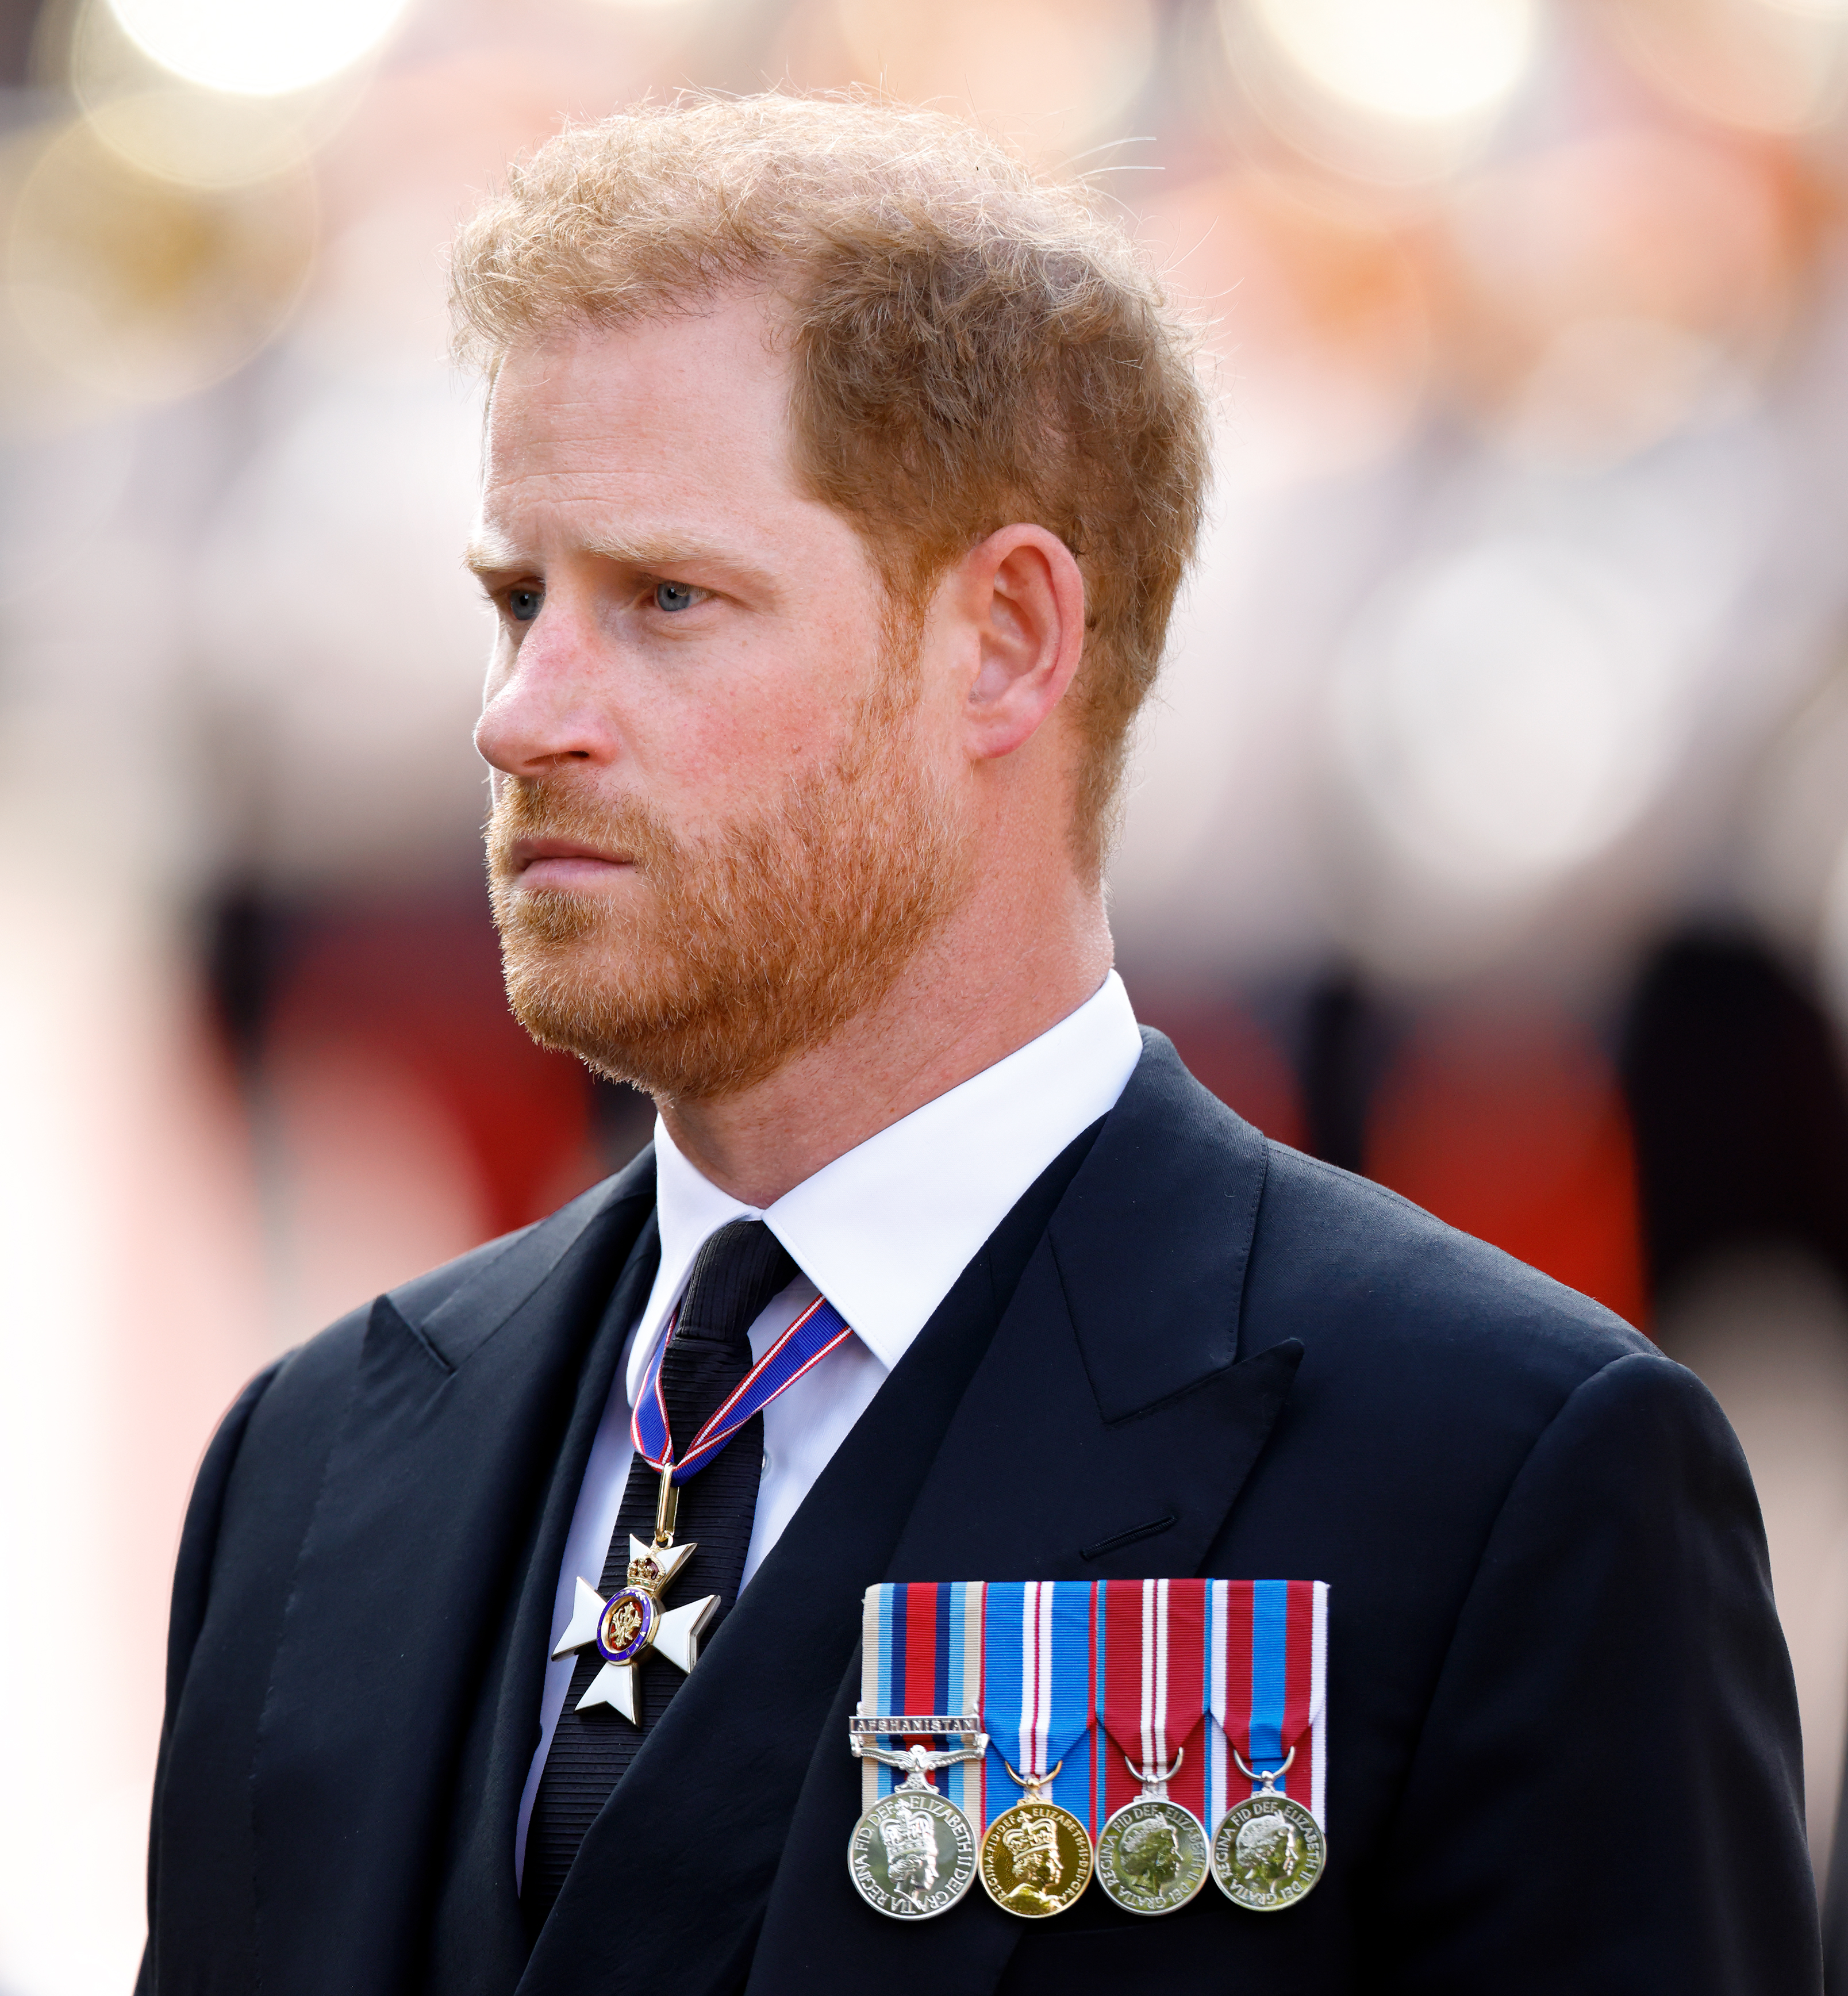 Prince Harry during the transfer of Queen Elizabeth's II's coffin from Buckingham Palace to The Palace of Westminster in London, England on September 14, 2022 | Source: Getty Images